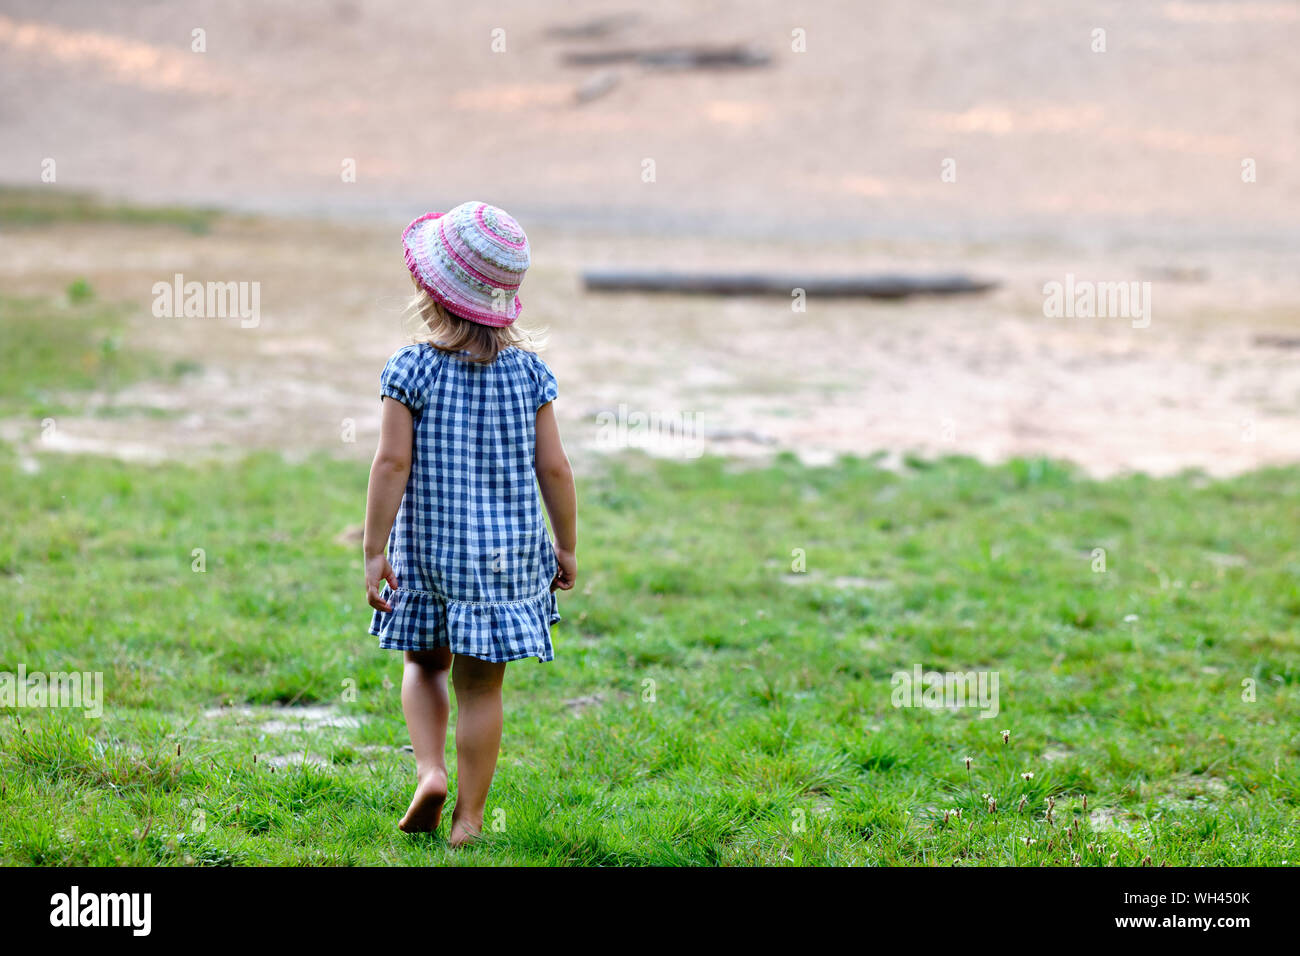 Rear view of a young child girl with unshod feet in summer dress walking on a natural meadow in nature Stock Photo